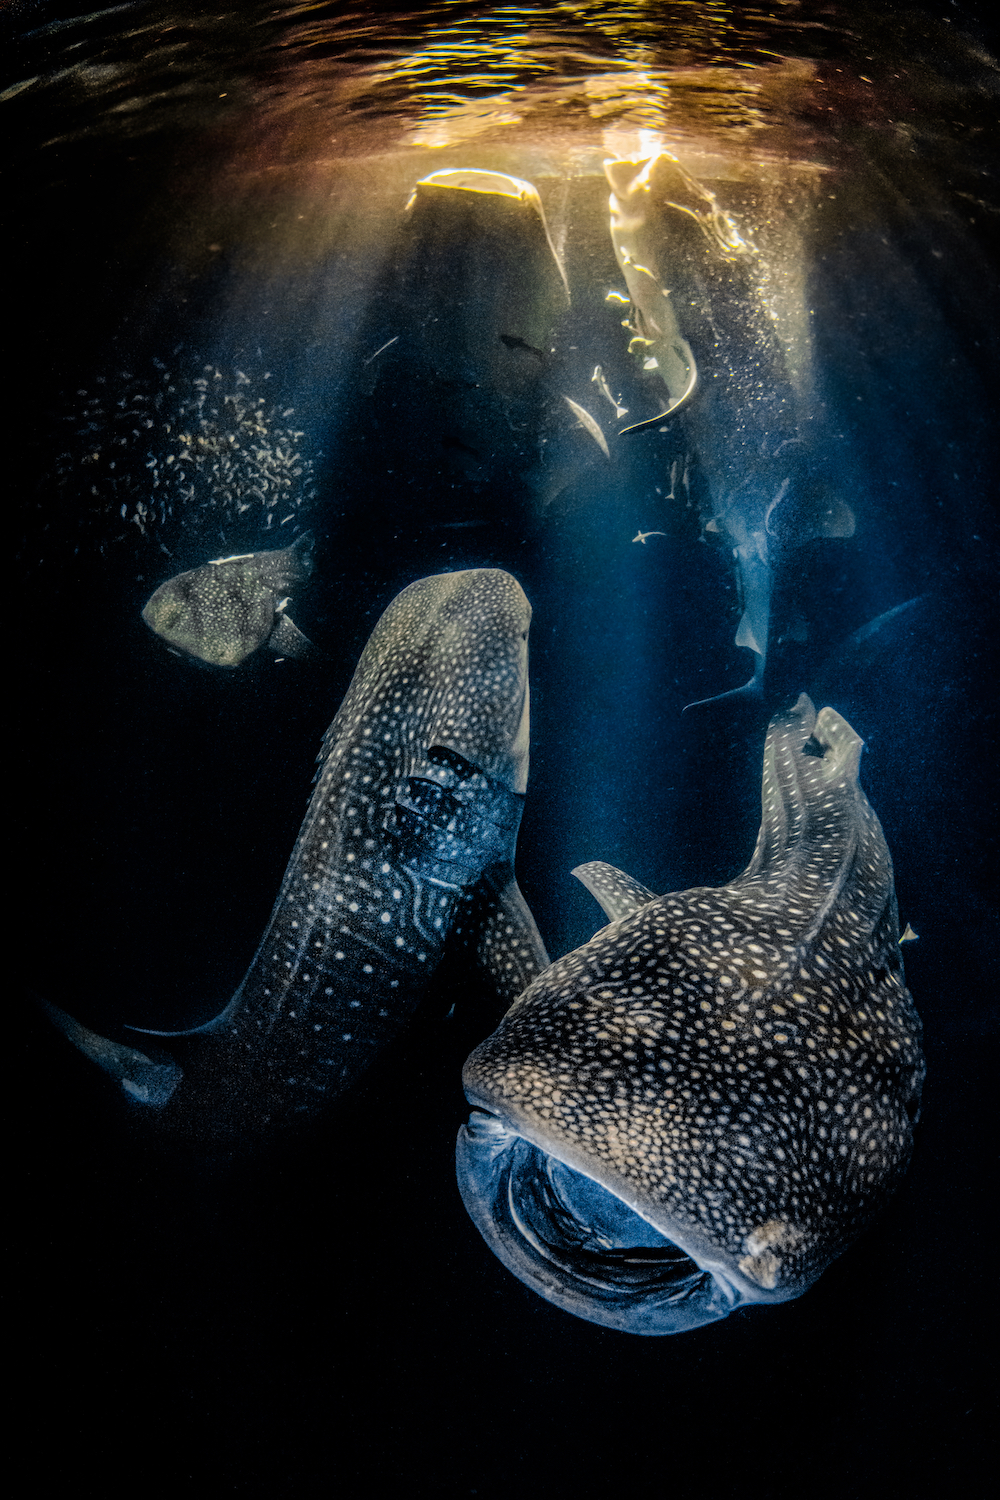 The winning image, of five feeding whale sharks off the Maldives, in the Underwater Photographer of the Year 2022 competition. Image: © Rafael Fernandez Caballero/UPY2022